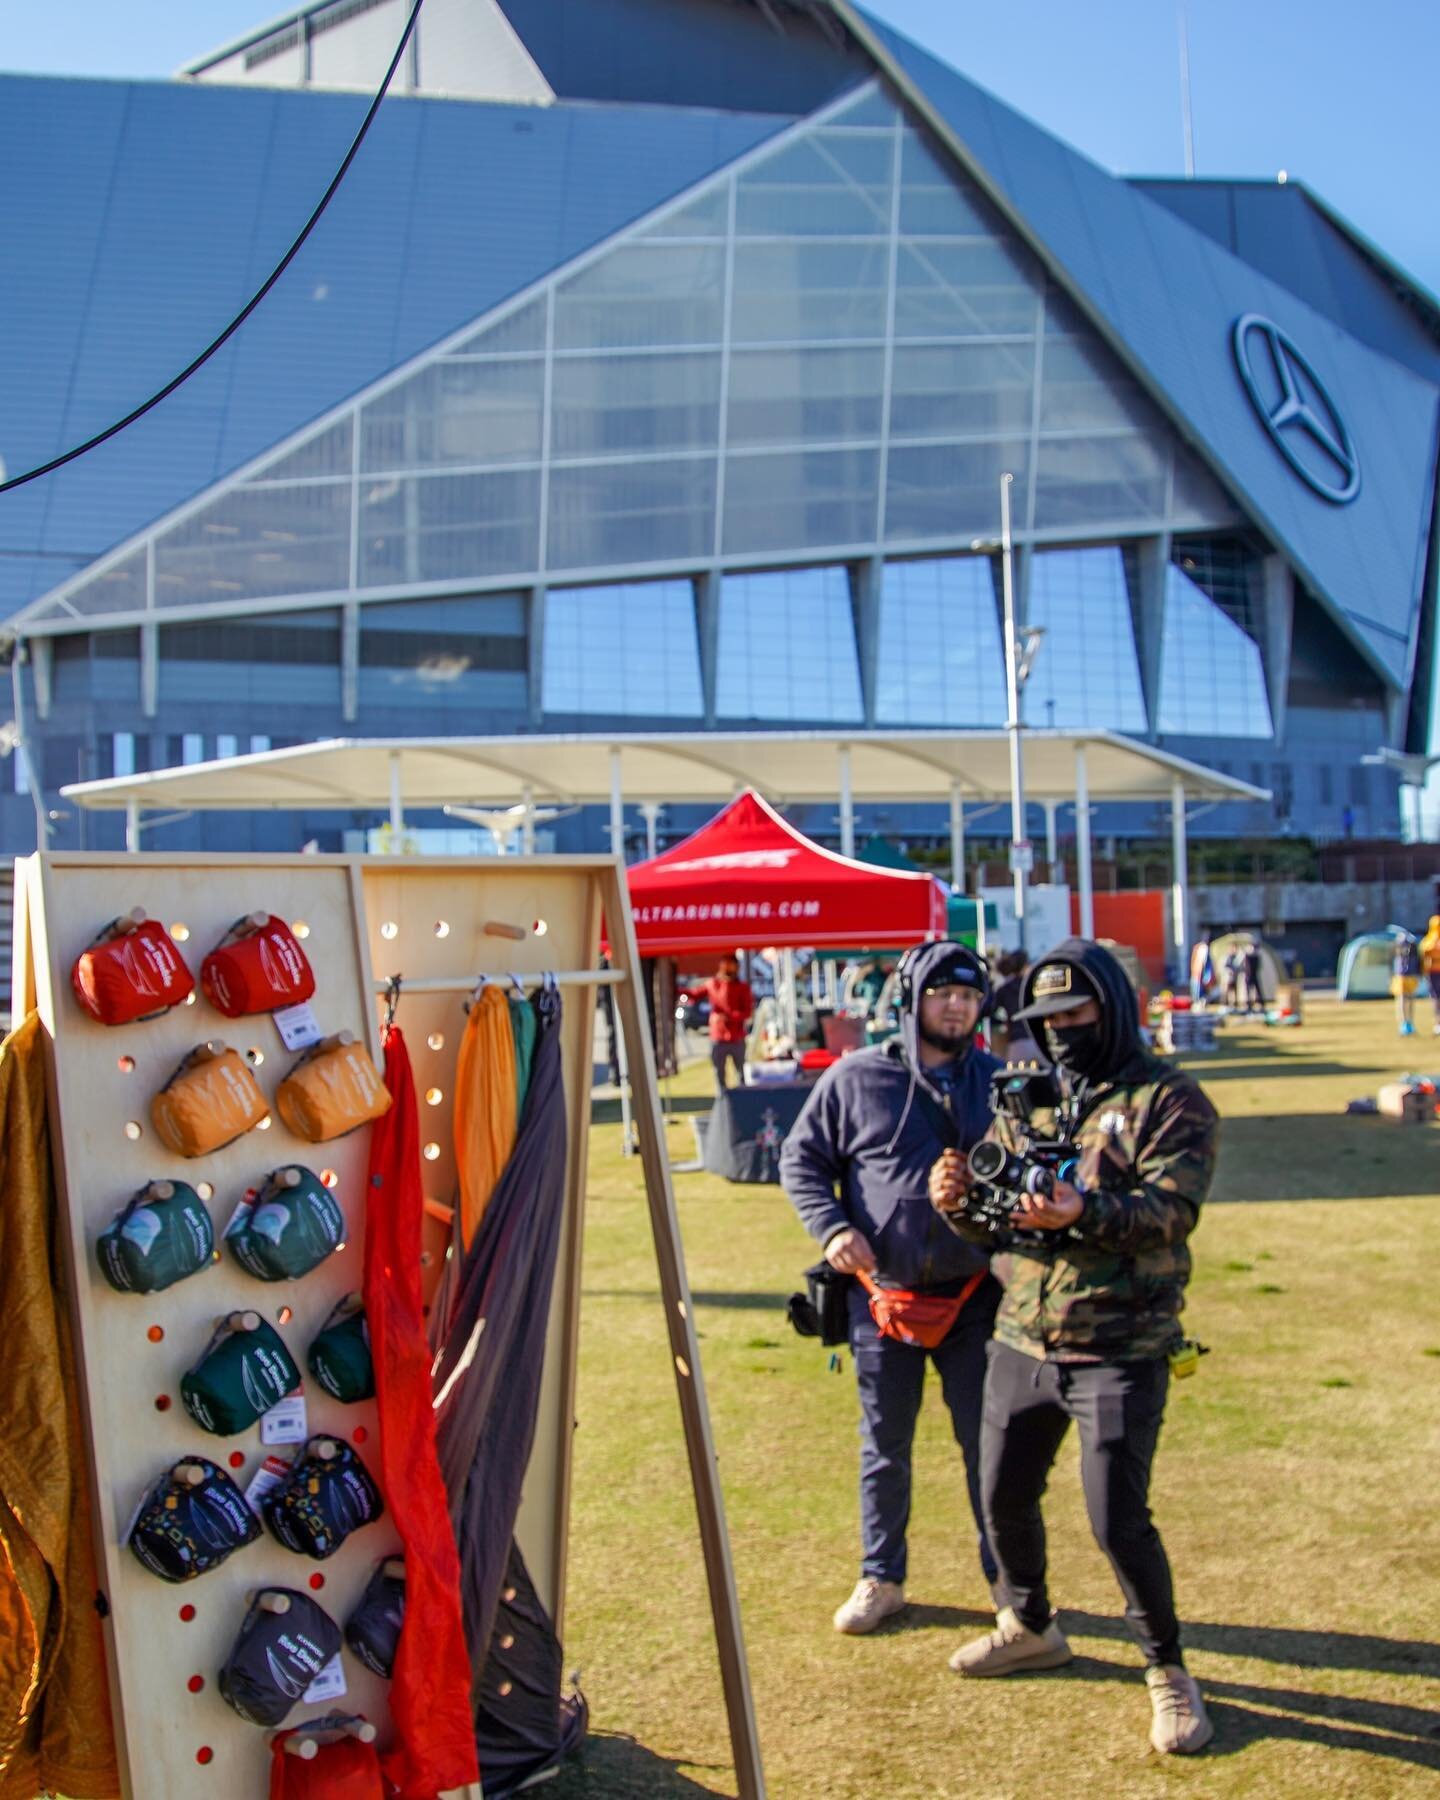 Two days, two nights, and two rock stars under the @mercedesbenzstadium for @rei and their Backyard Campout and #Festival in #Atlanta. 🏕